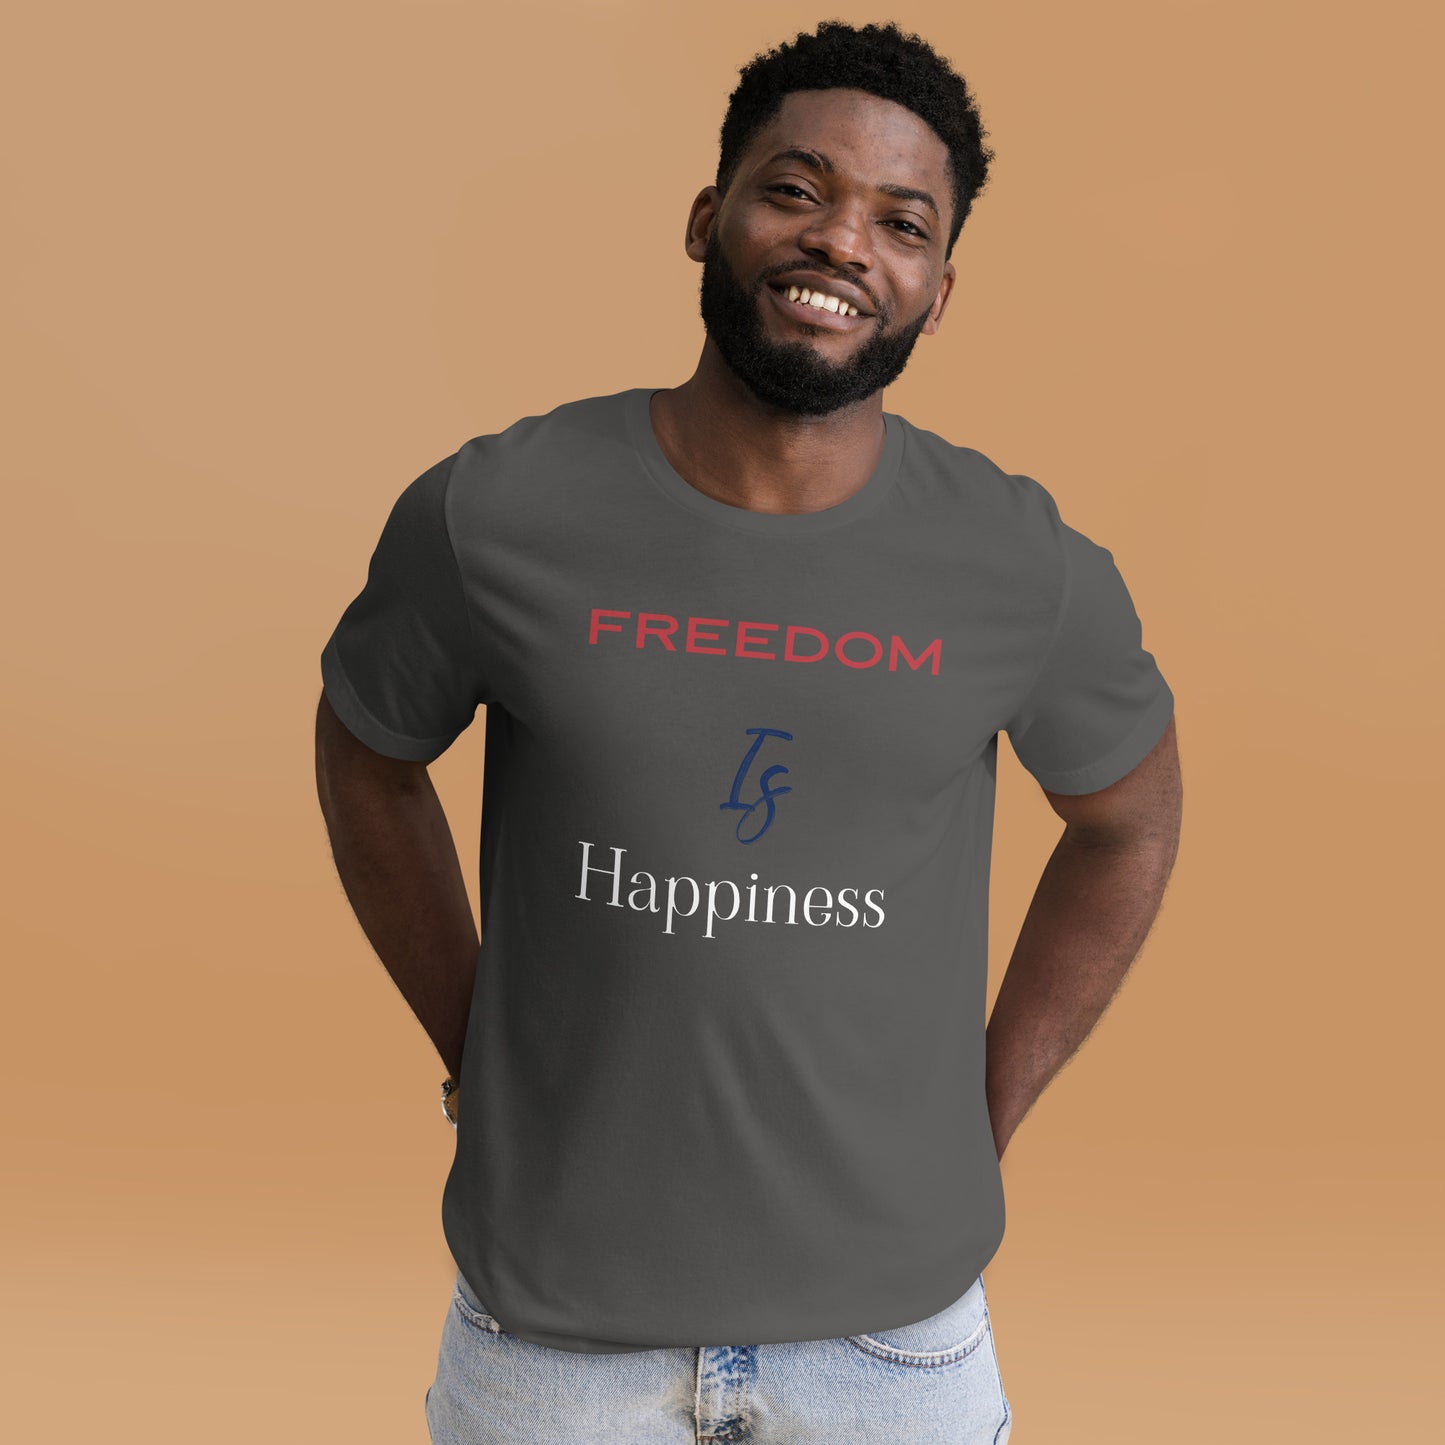 Freedom is happiness T-shirt